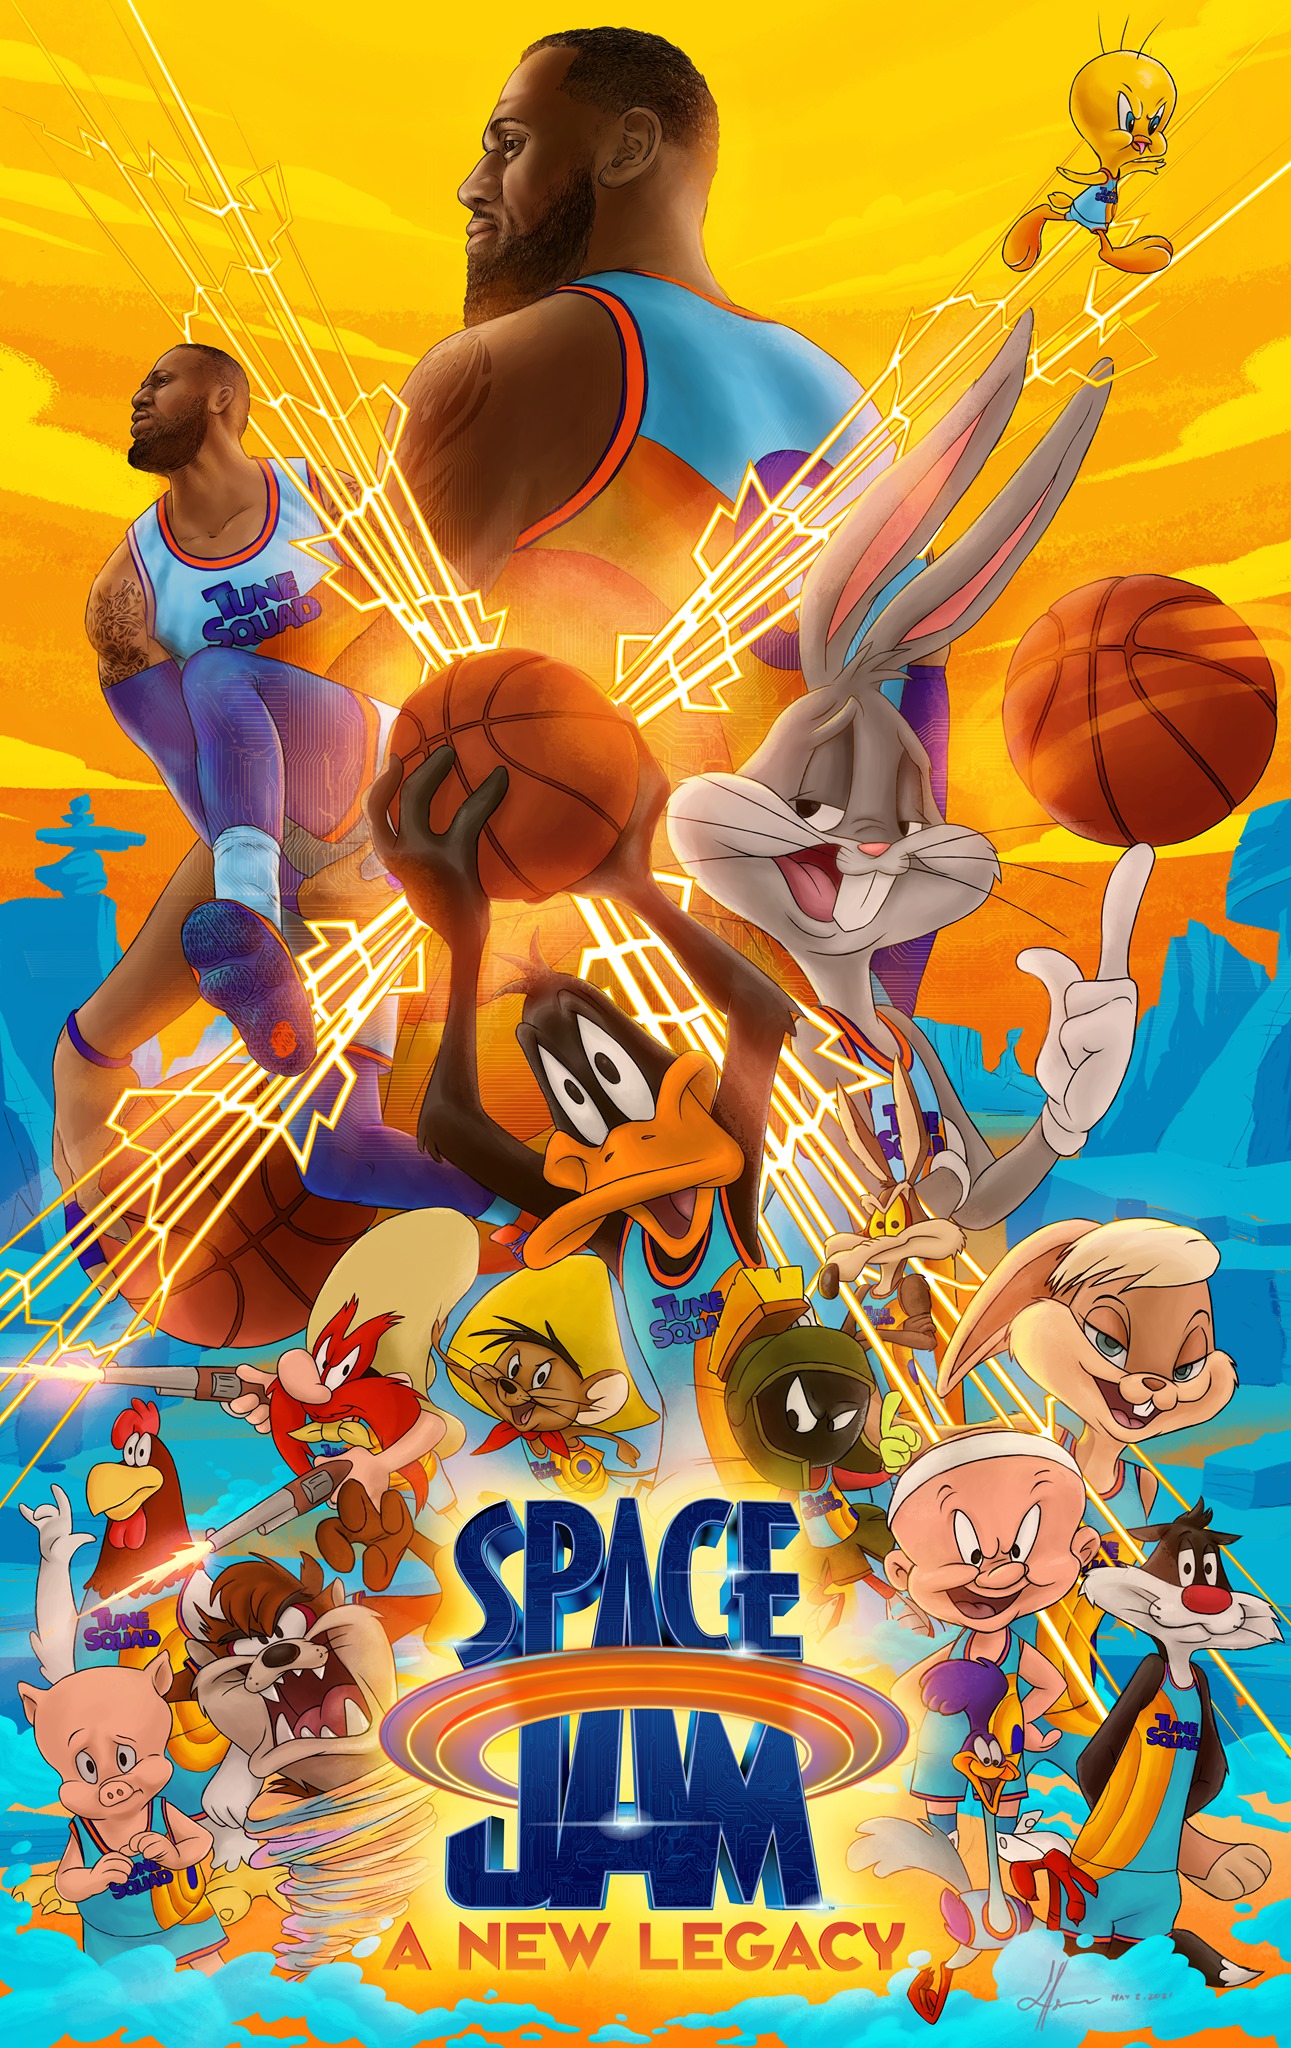 Space Jam A New Legacy Gallery Jam Looney Bugs Rappler Assets2 Squad Lebron Goon Blowing 